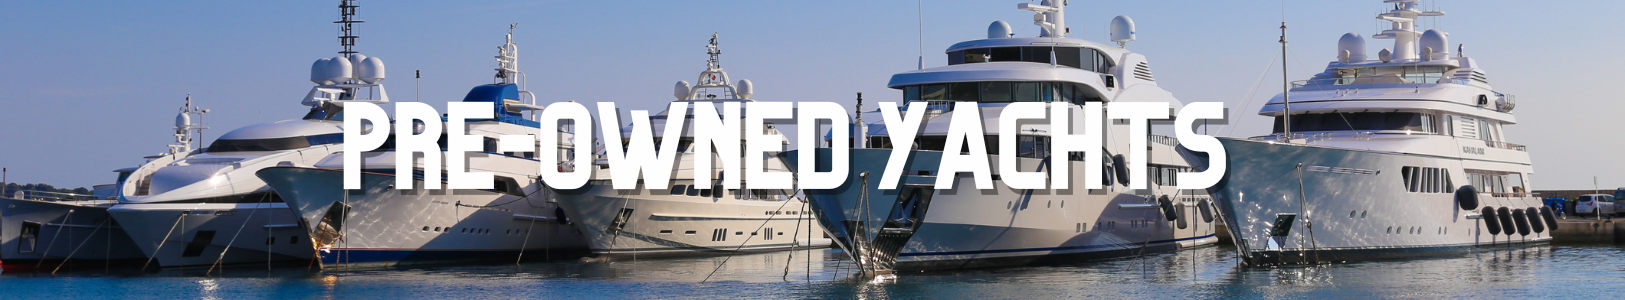 pre-owned-yachts